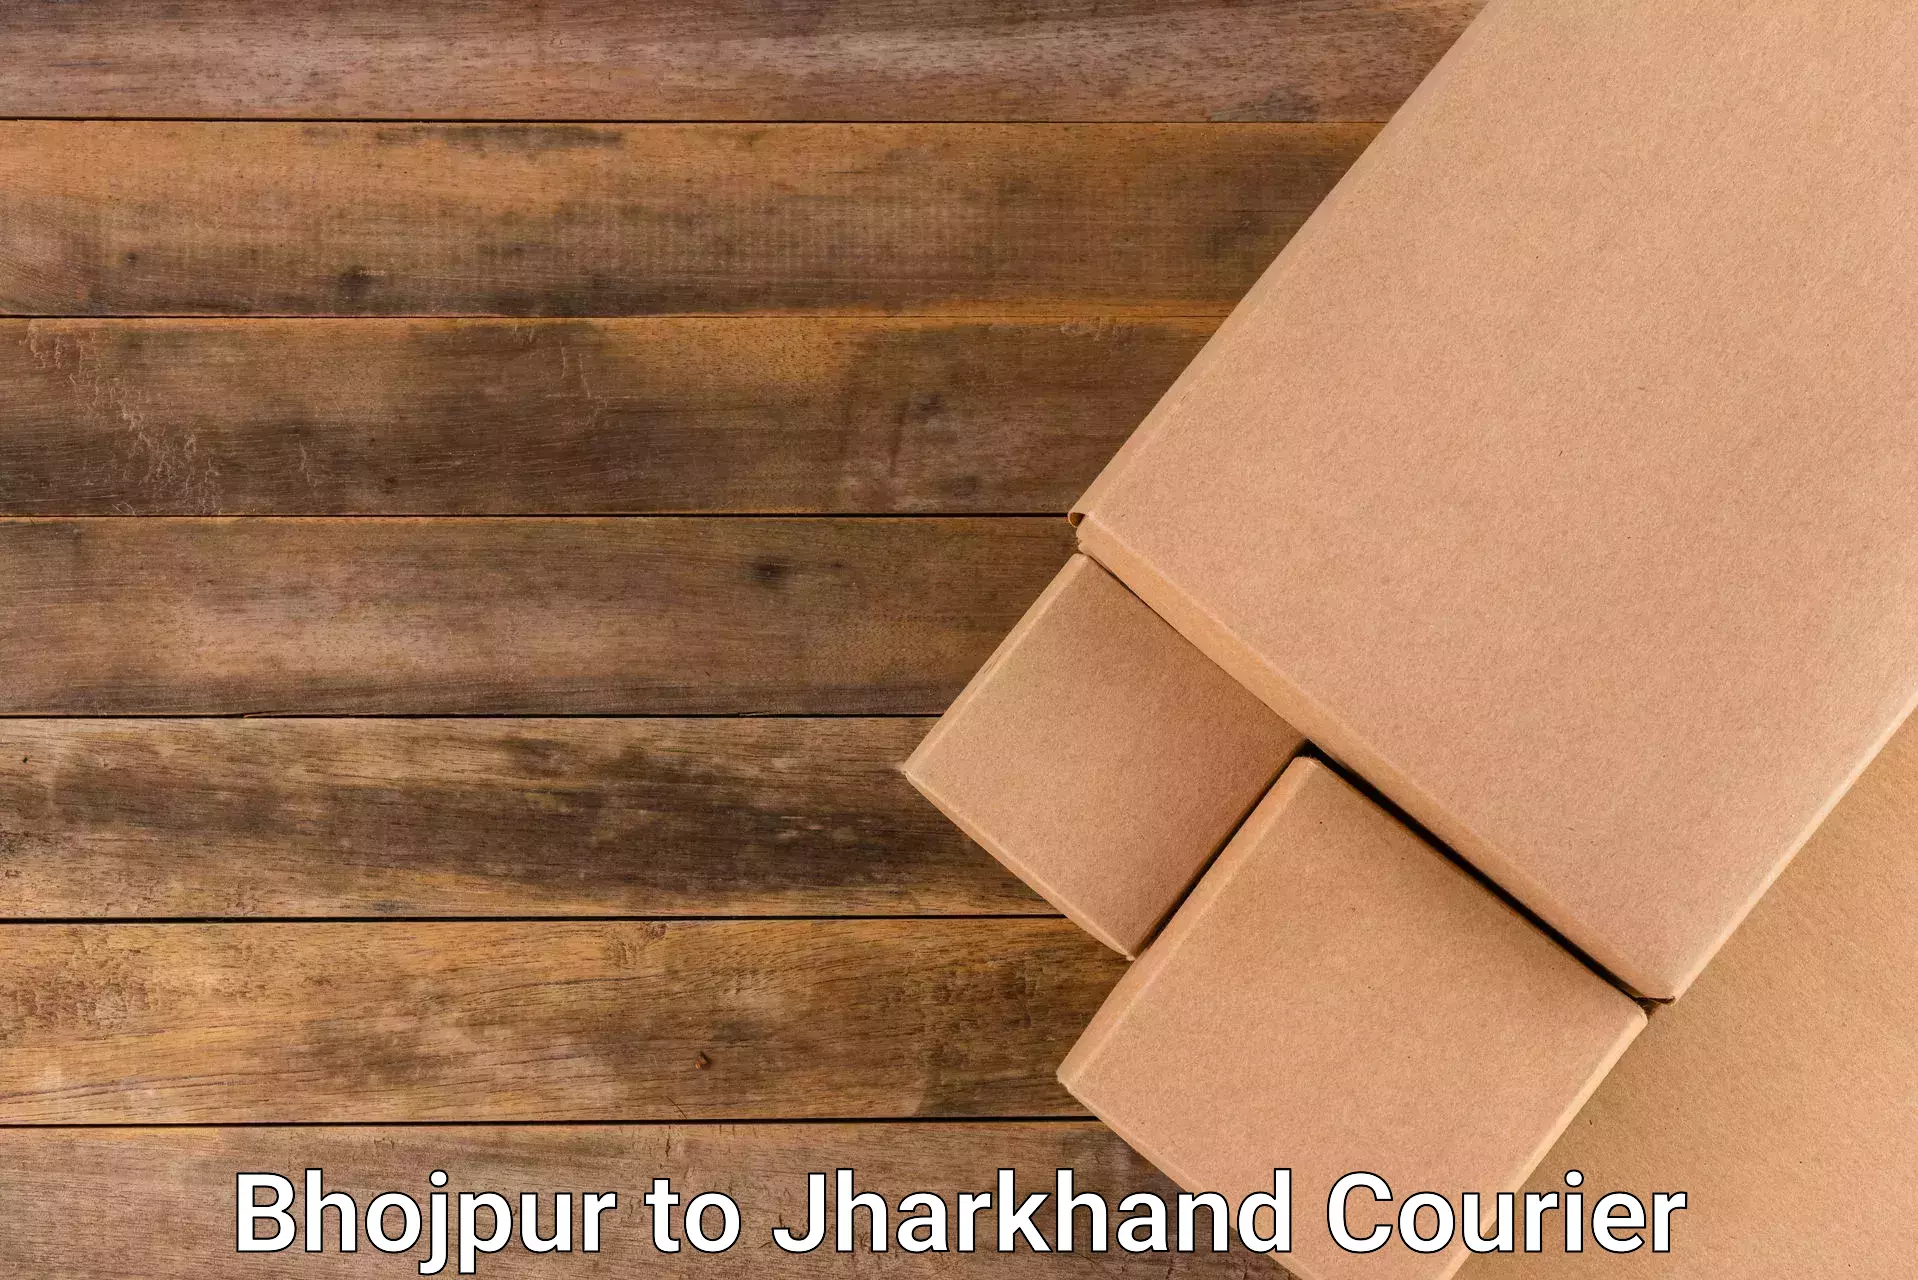 Next day courier in Bhojpur to Jharkhand